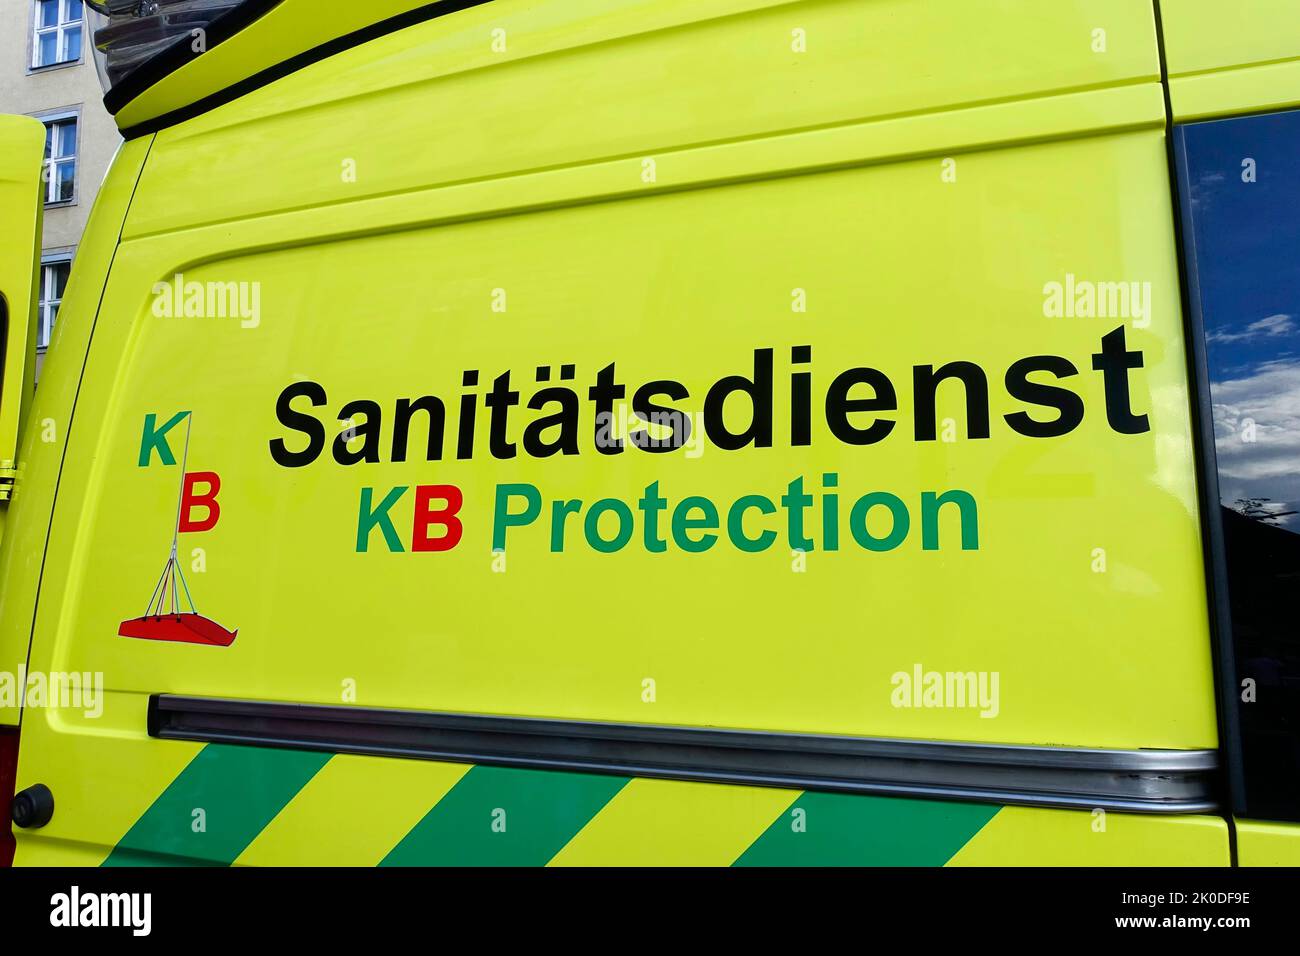 Vehicle of KB Protection in Berlin, Germany Stock Photo